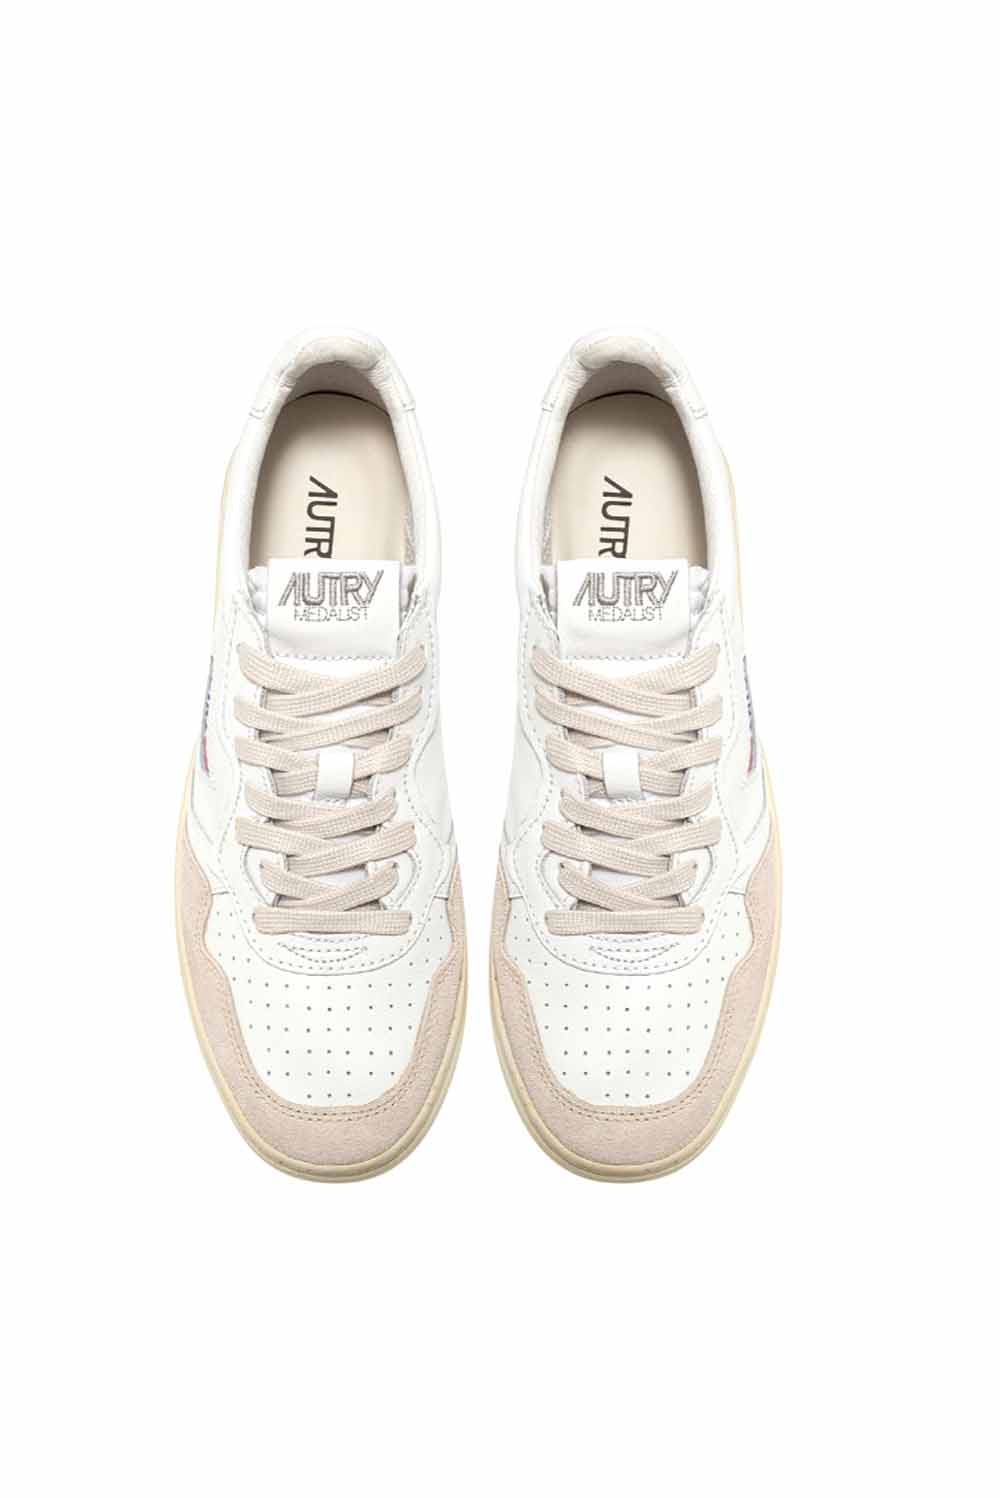  Autry Sneakers Medalist Low Suede-white Woman - 4